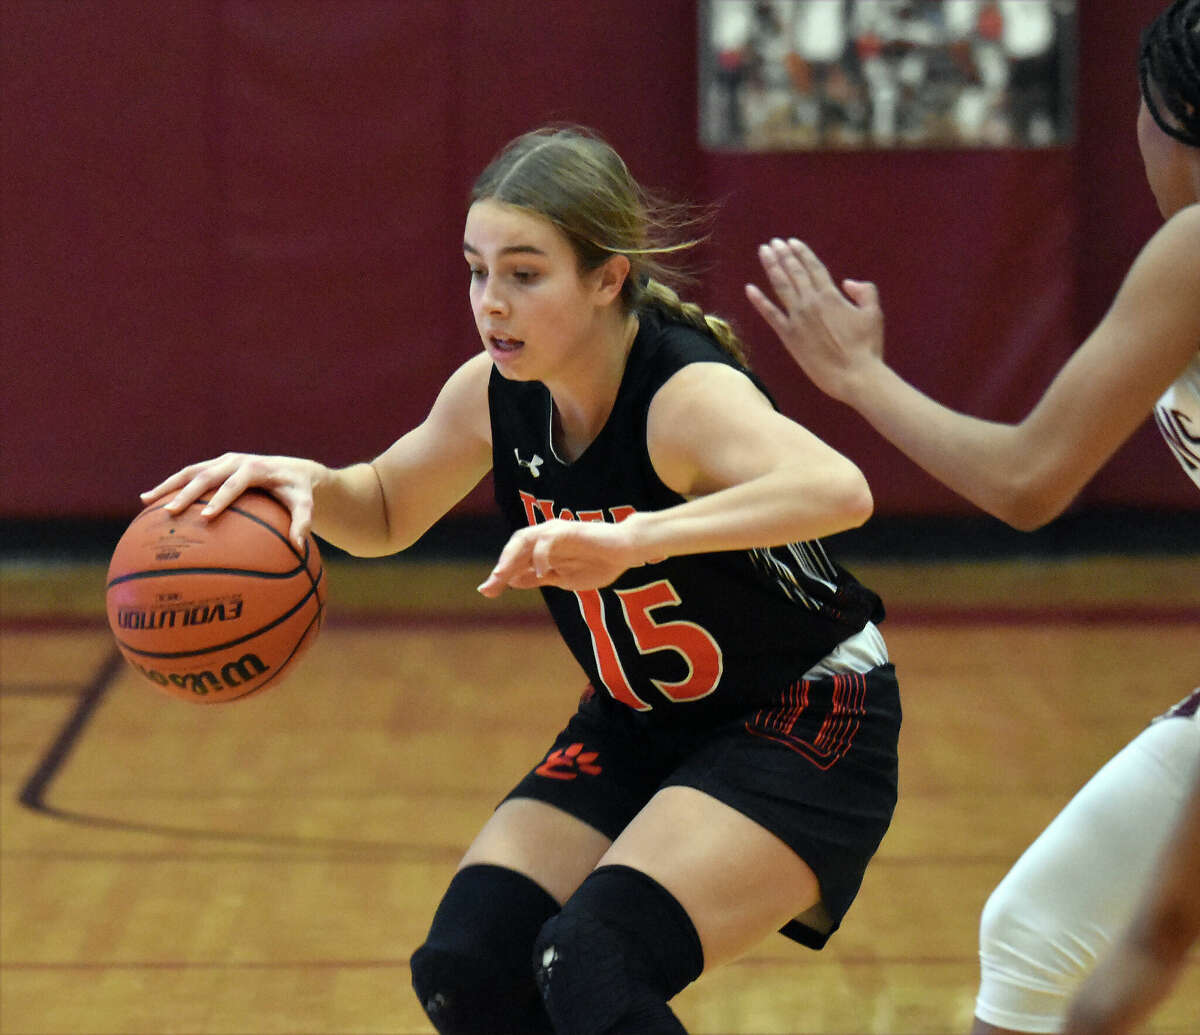 Edwardsville's Blakely Hockett dribbles at the top of the key against Belleville West on Thursday in Southwestern Conference action in Belleville.